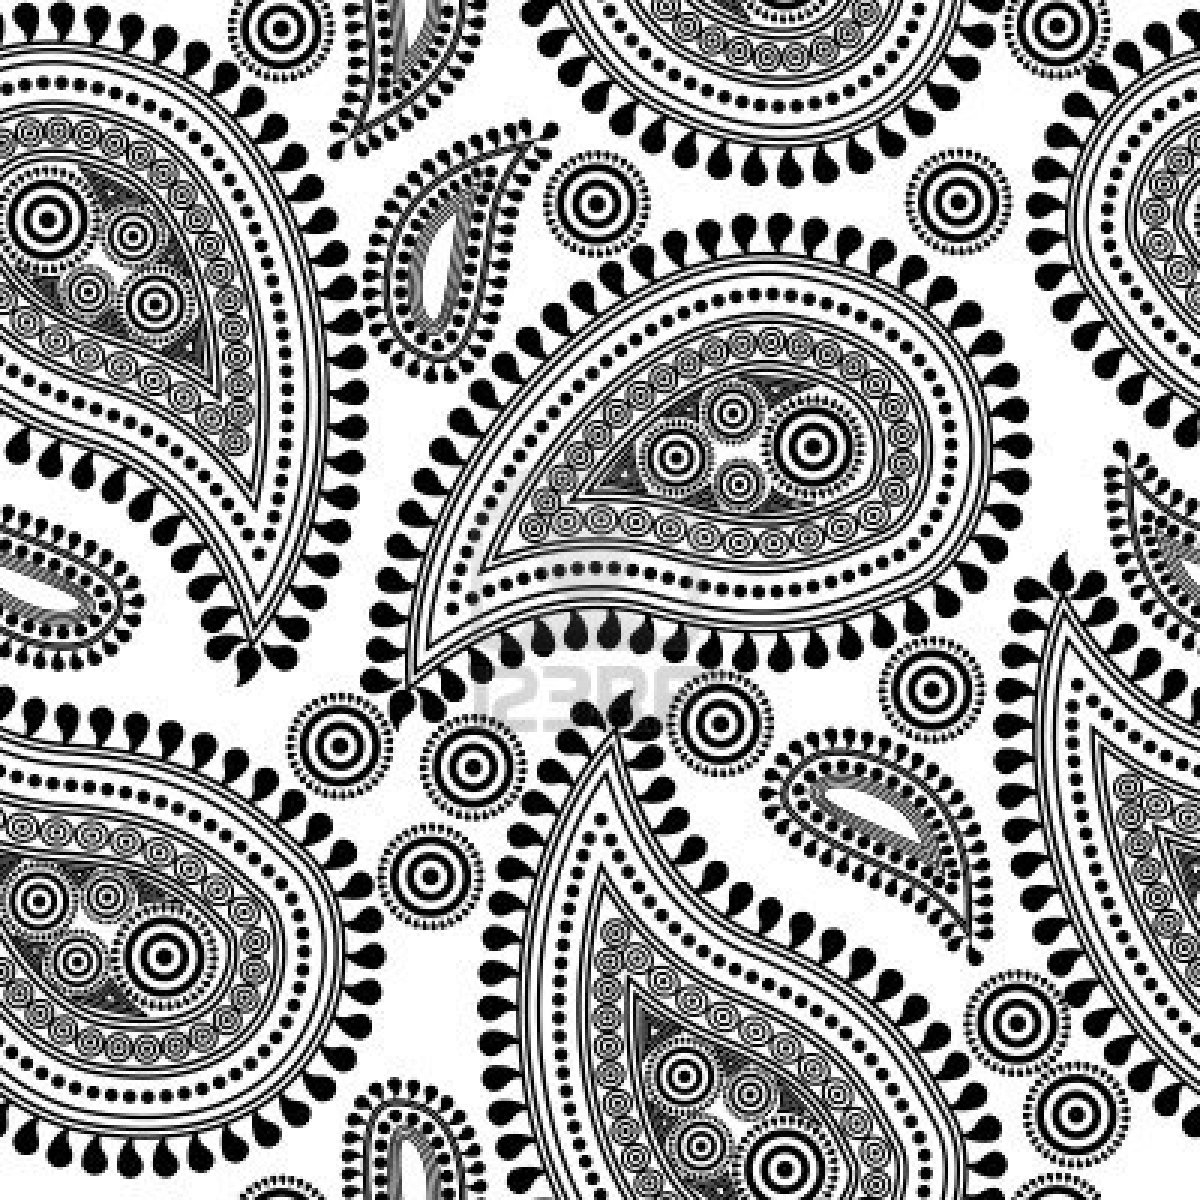 Black and White Paisley Pattern